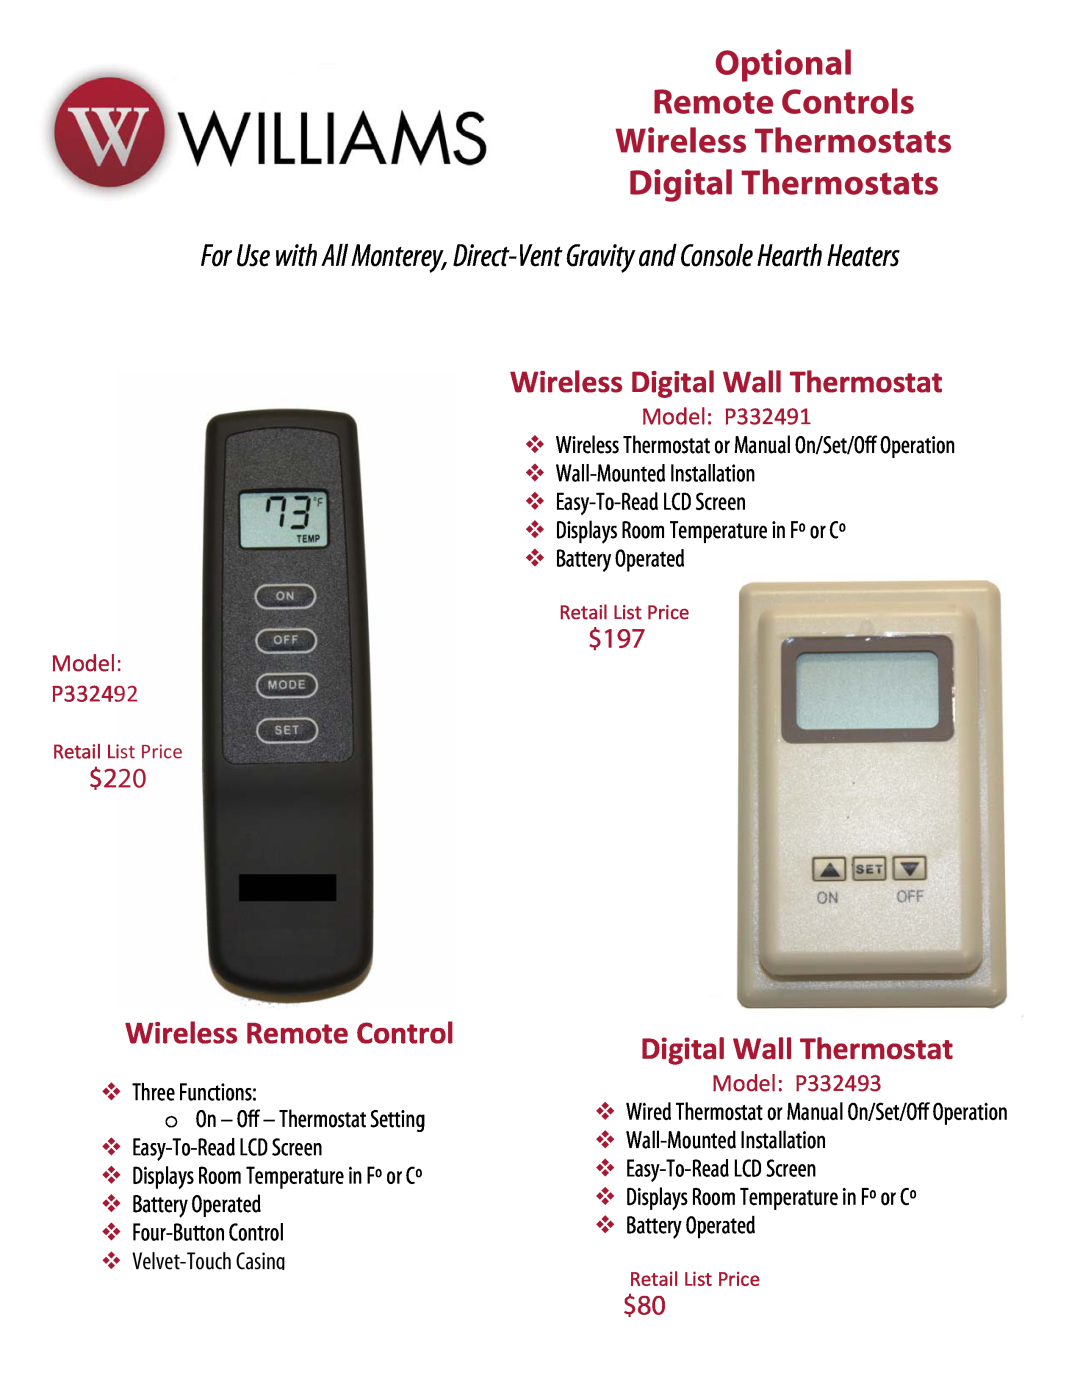 Williams 6501521 Optional Remote Controls Wireless Thermostats, Digital Thermostats, Wireless Digital Wall Thermostat 